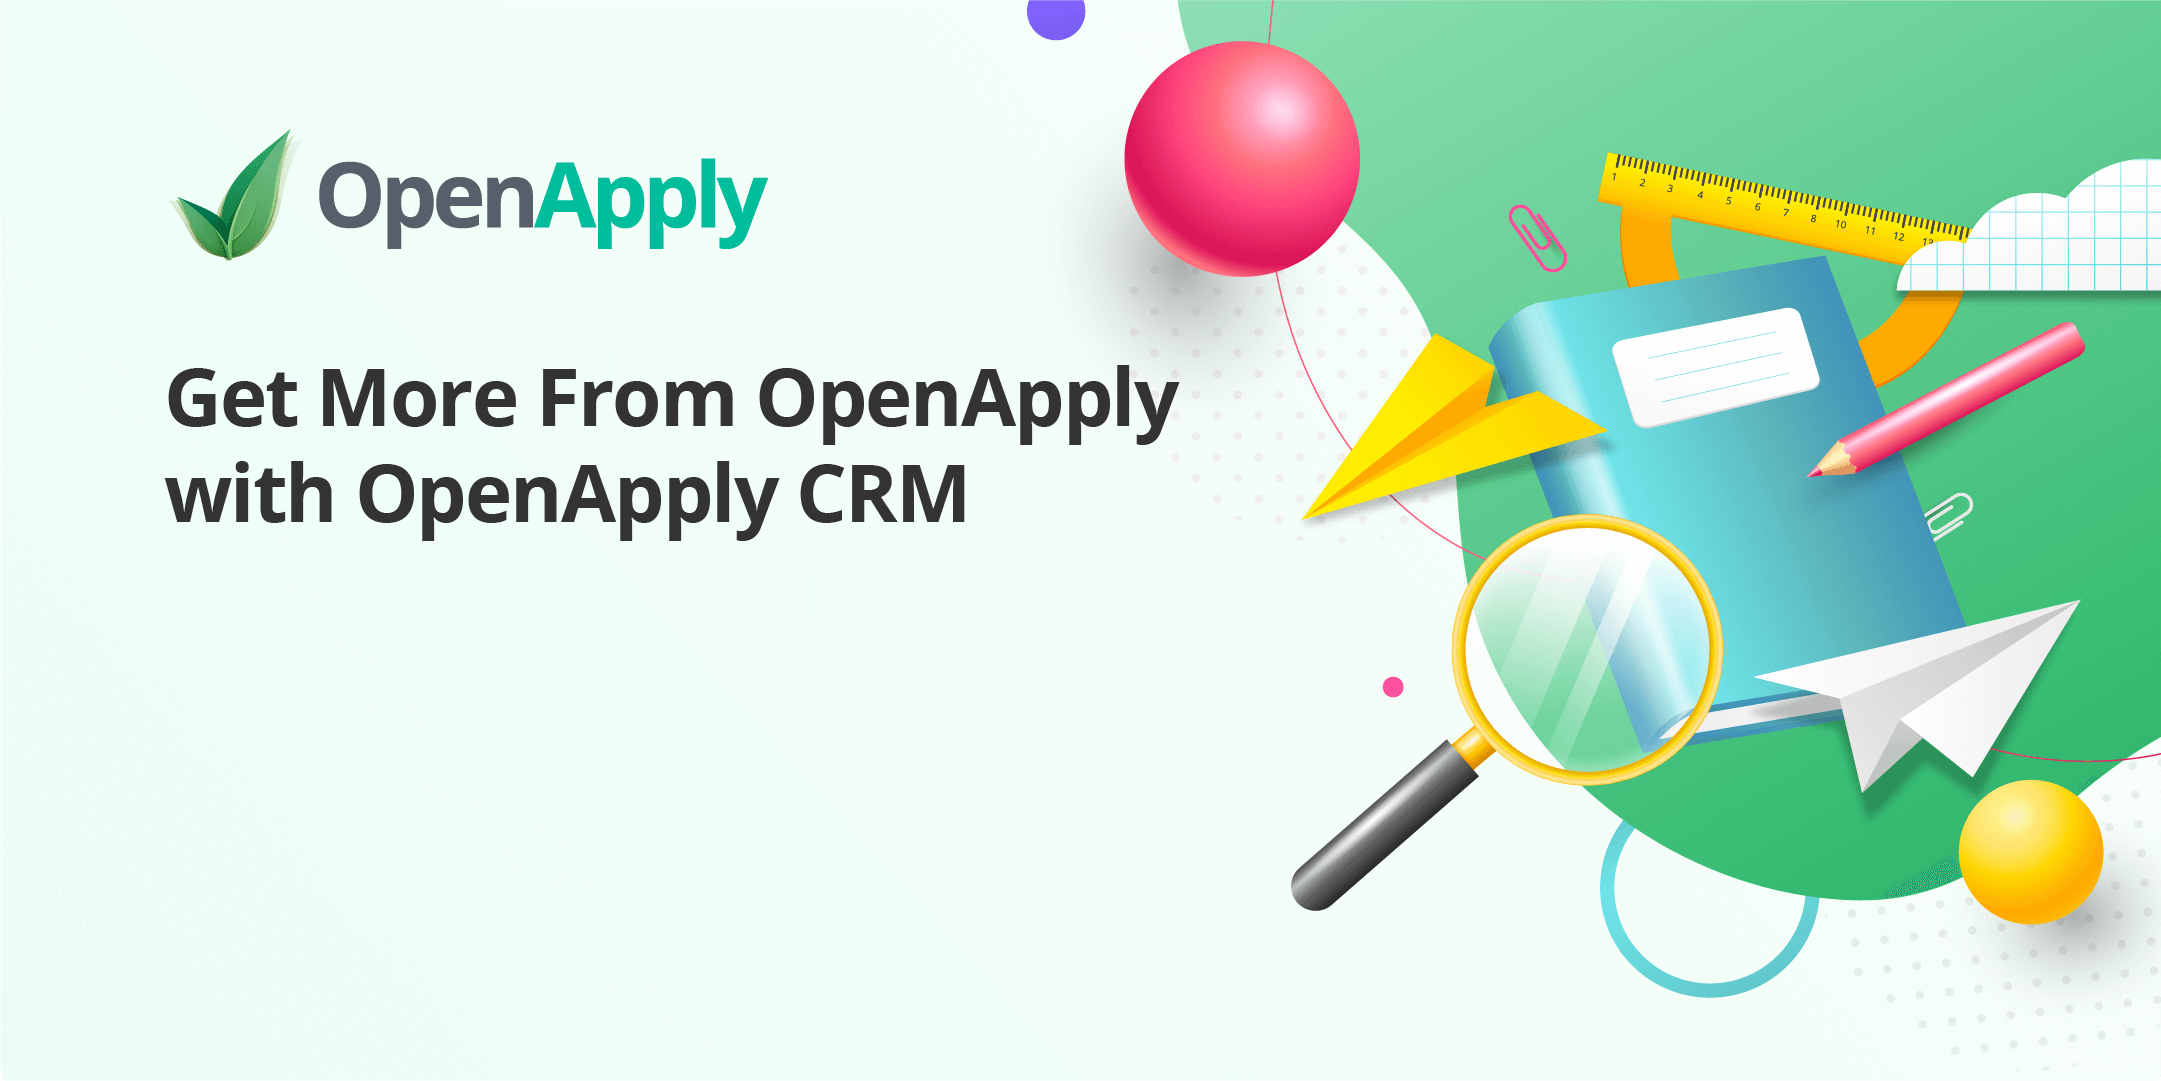 Get More From OpenApply with OpenApply CRM